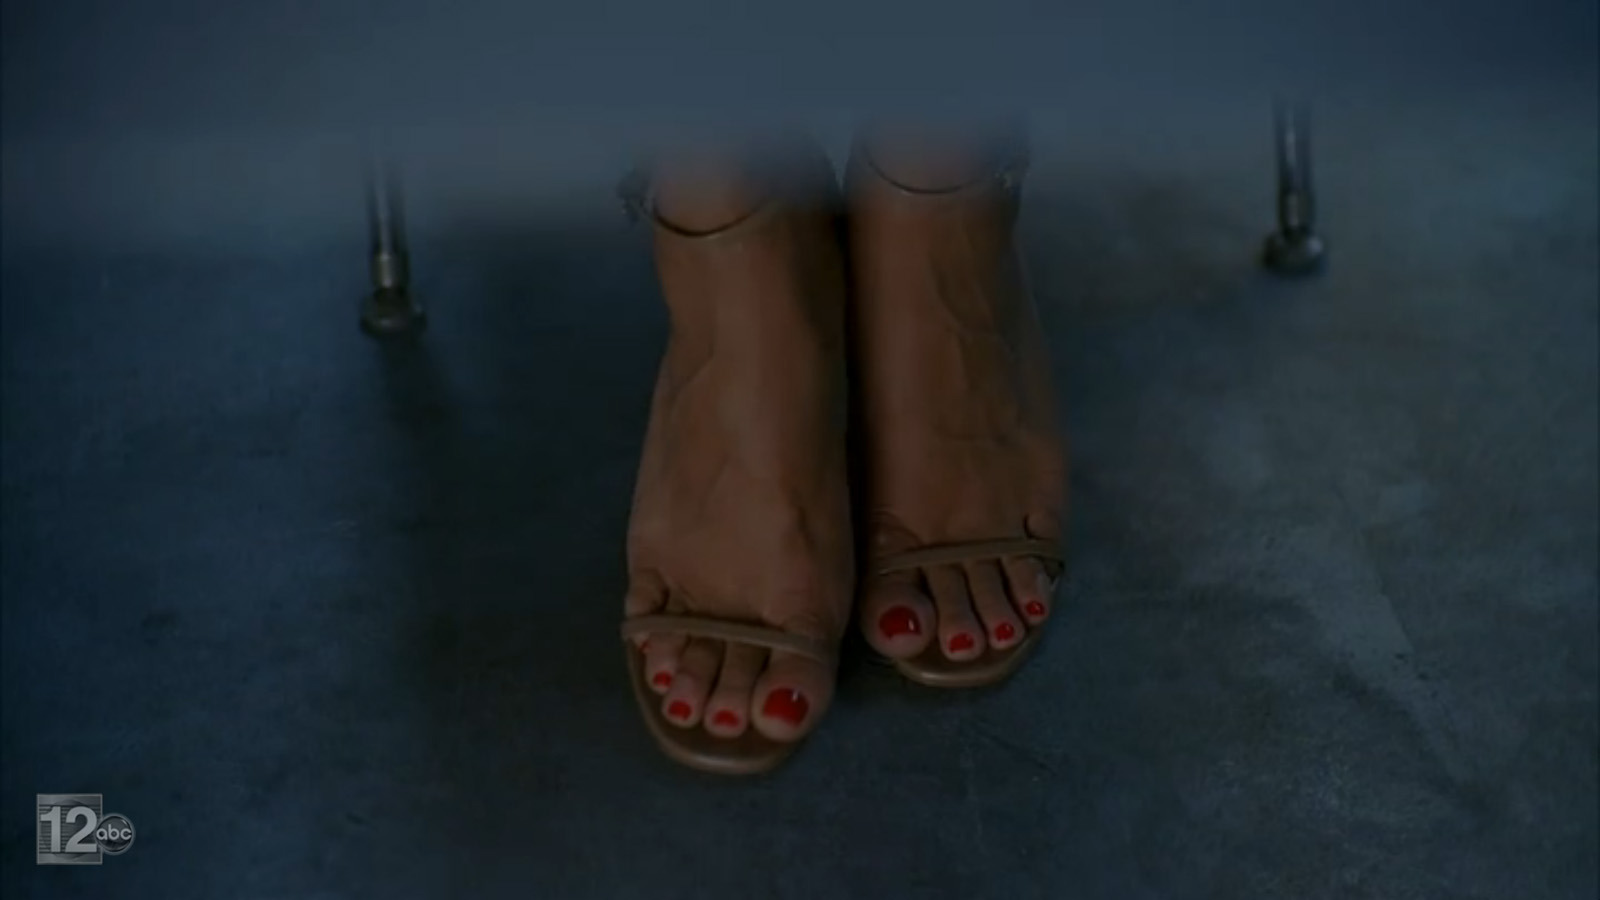 People who liked Vanessa Williams's feet, also liked.